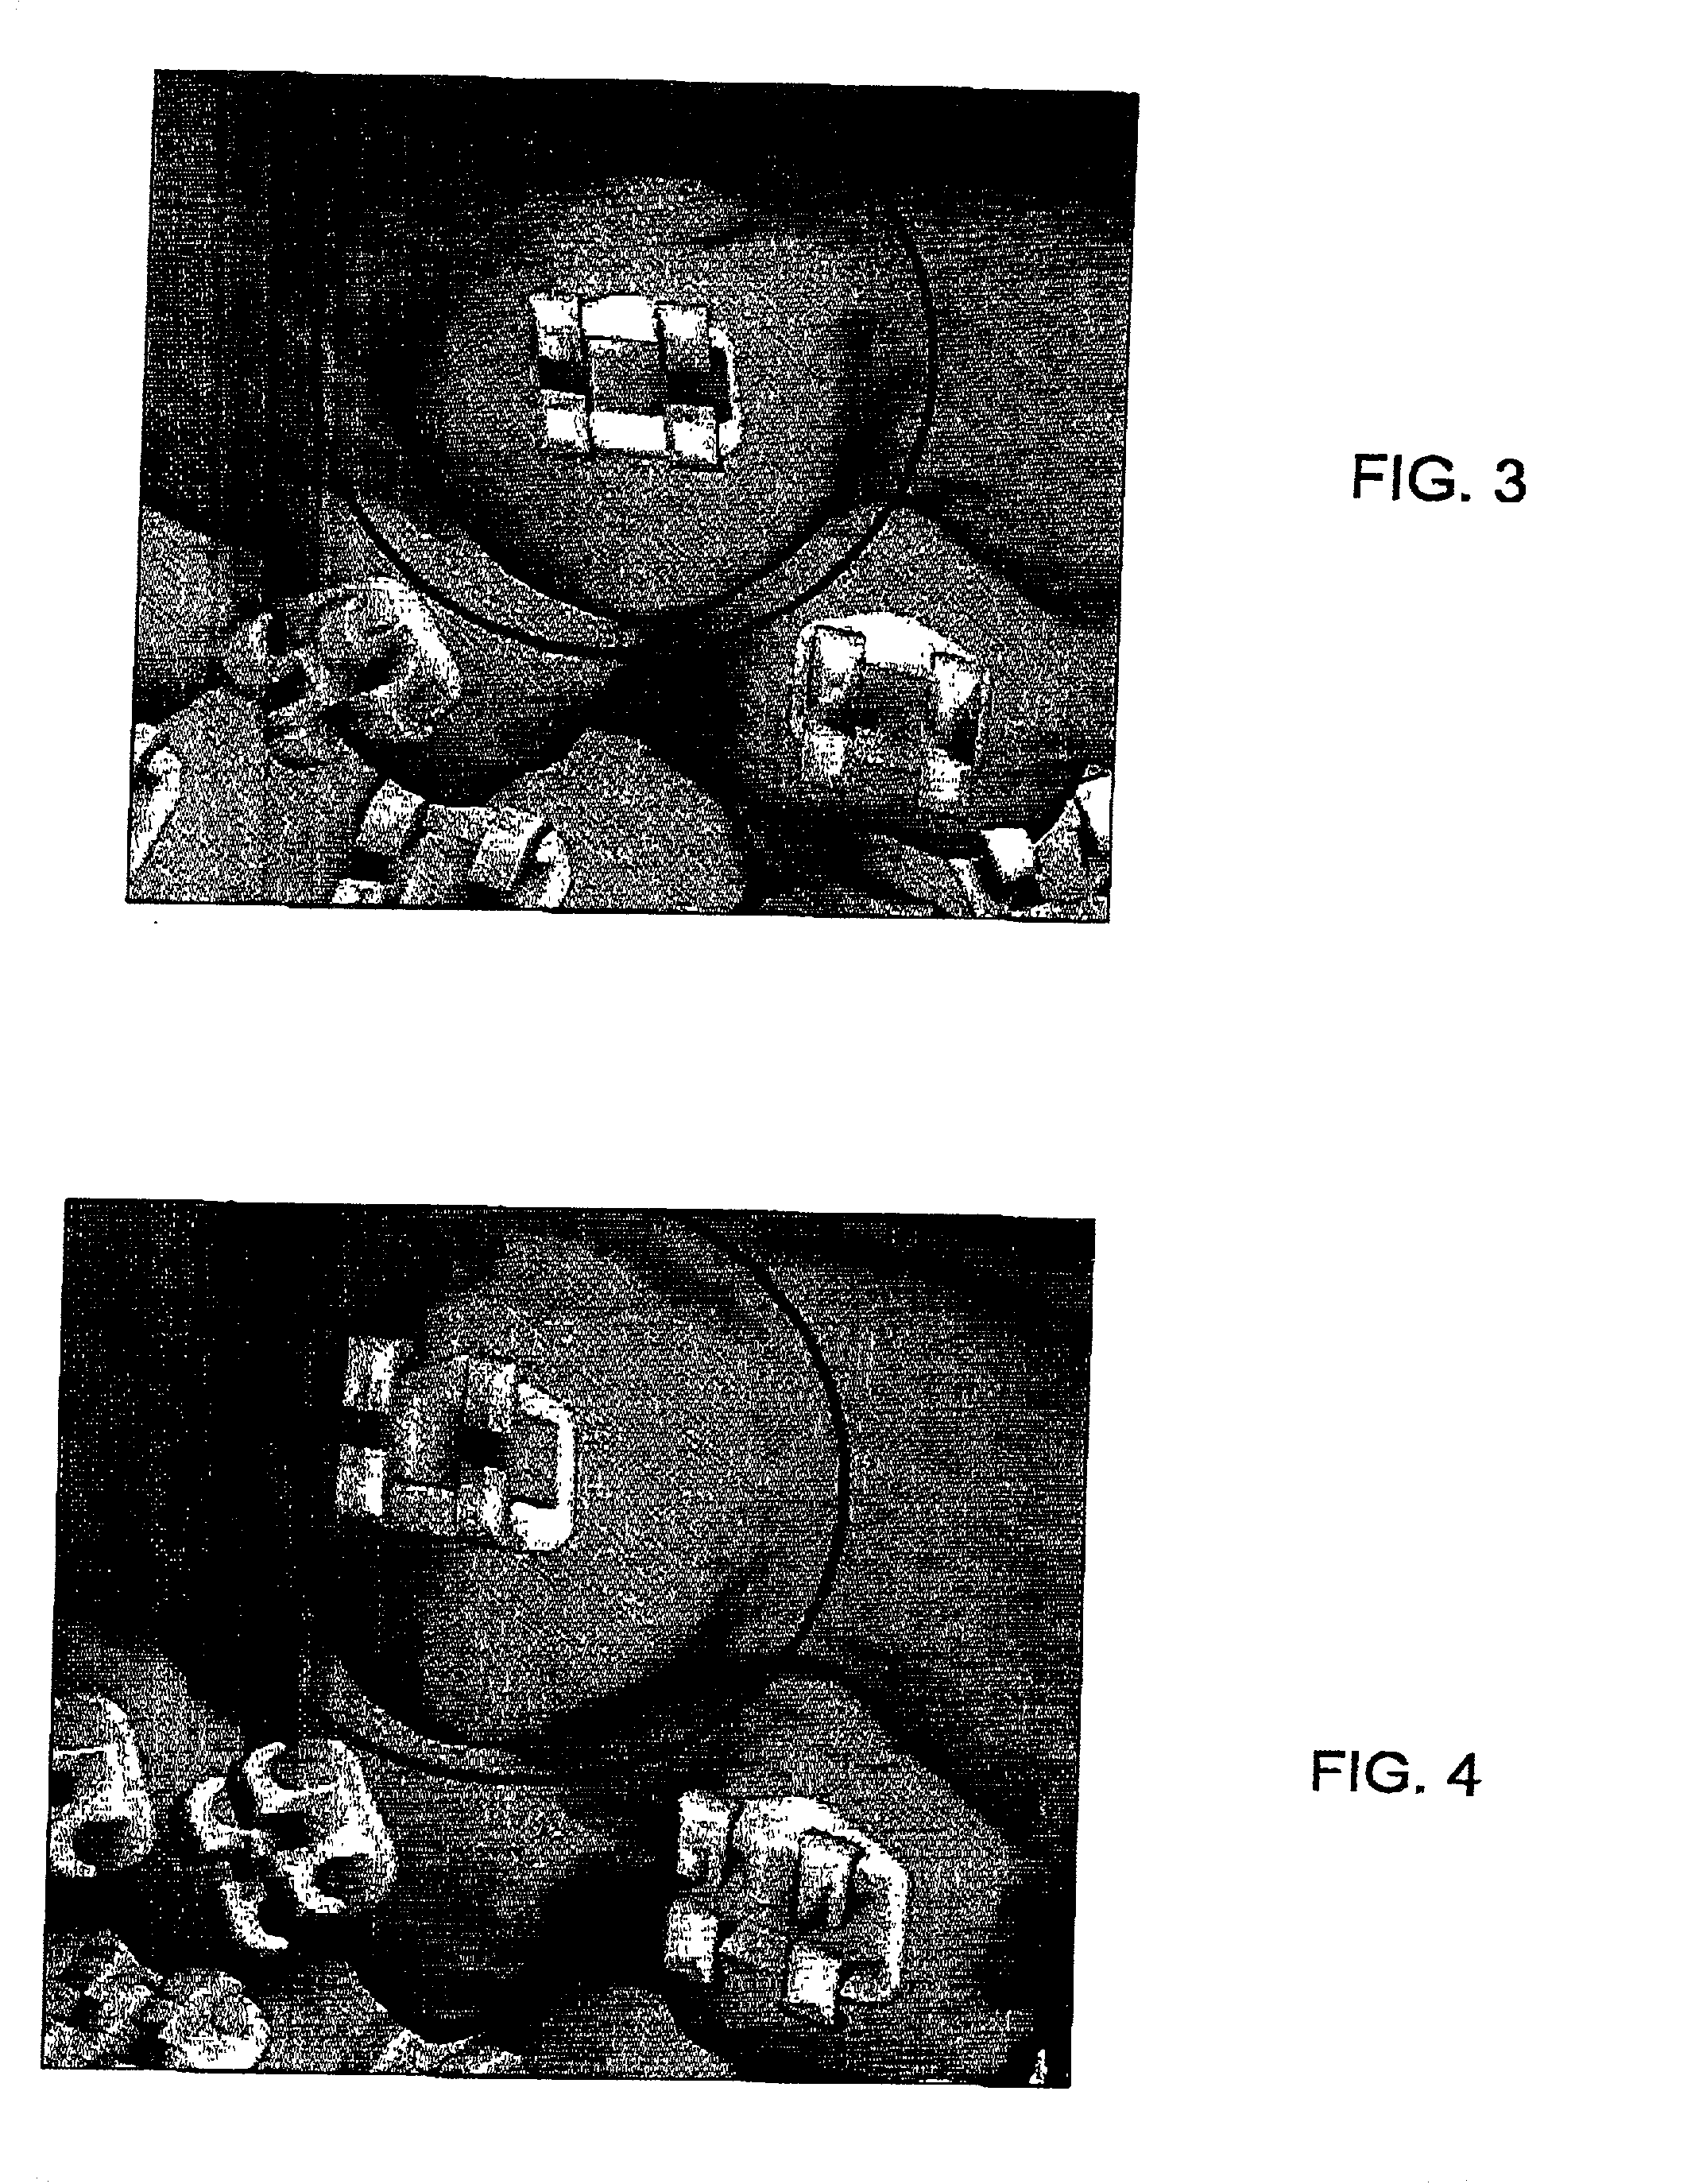 Method and system for assisting in applying an orthodontic treatment